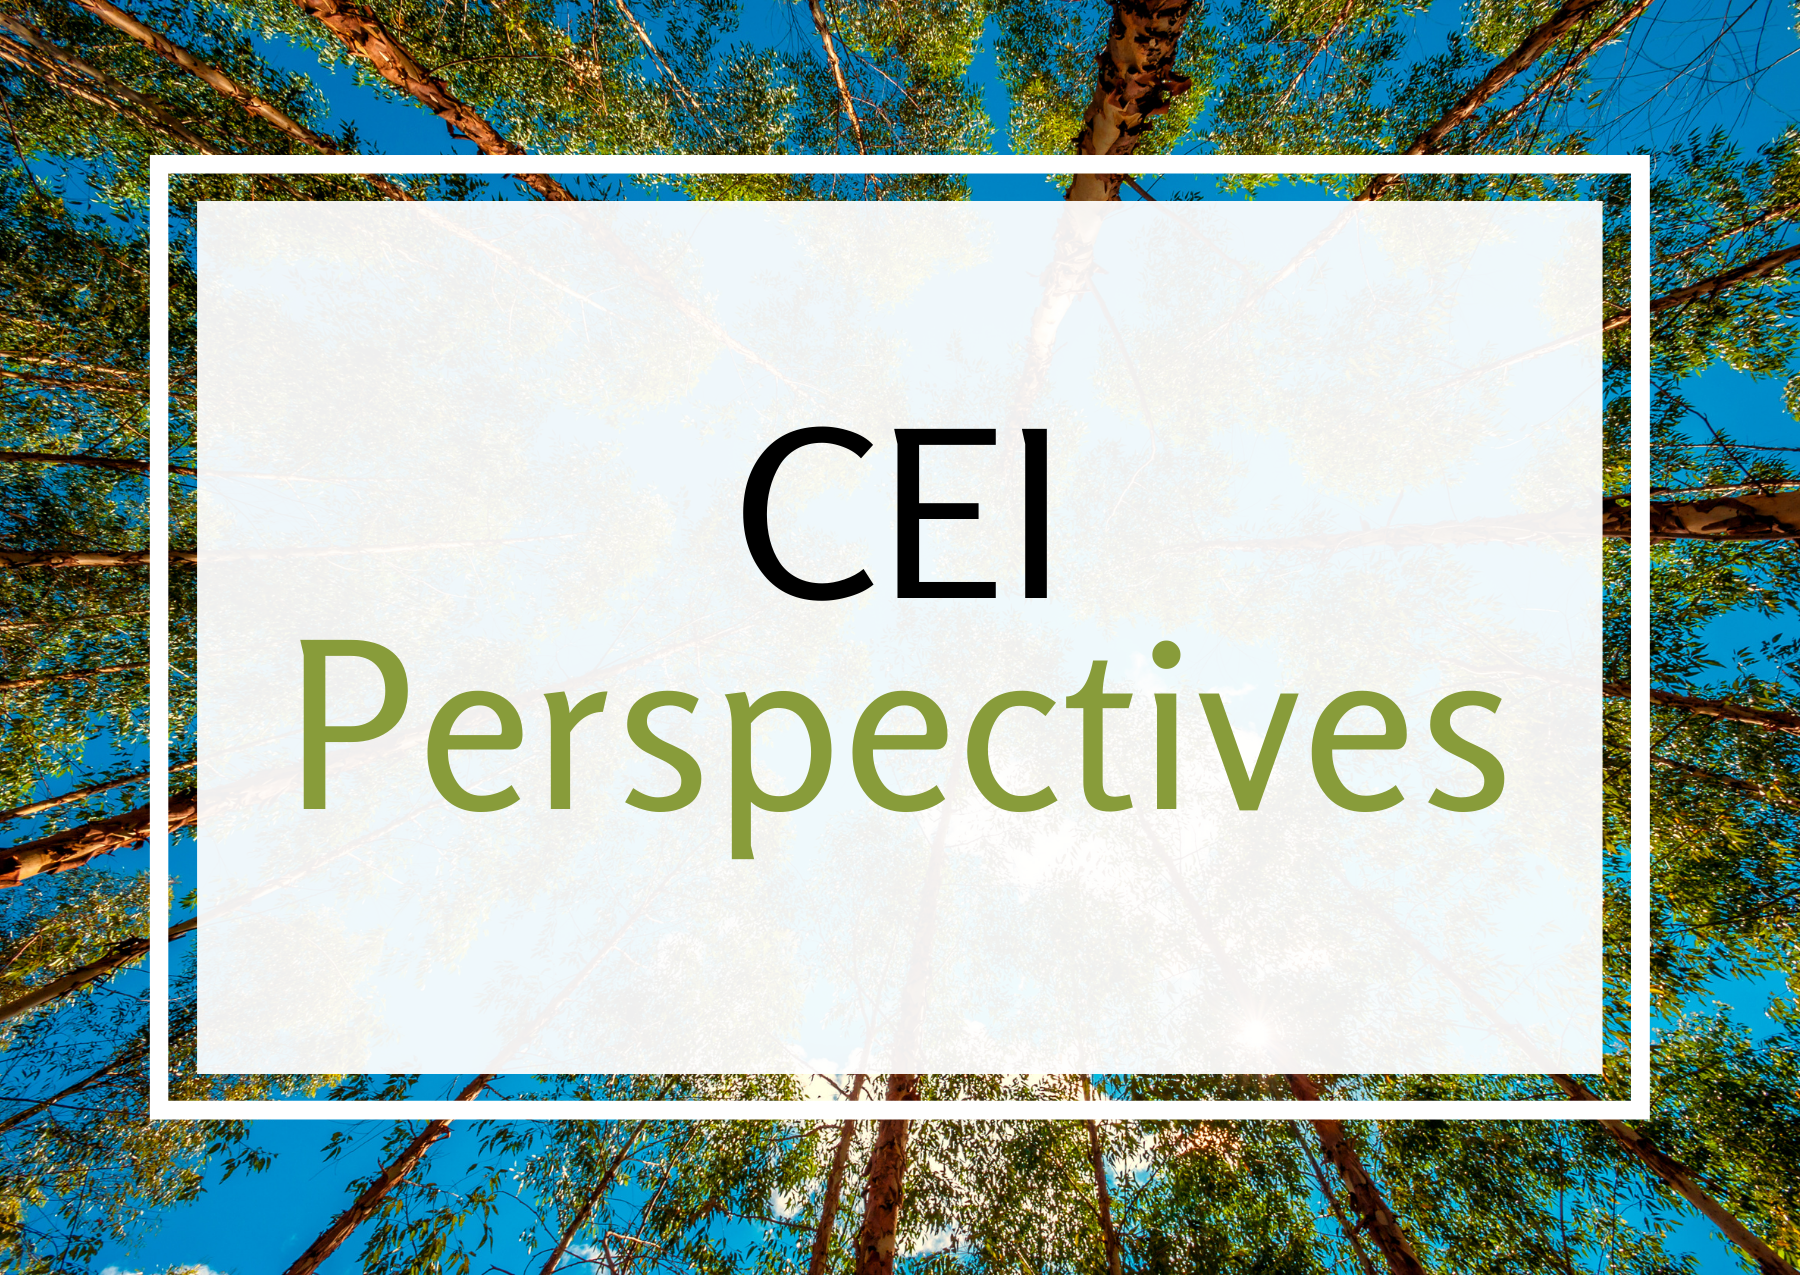 CEI Perspectives